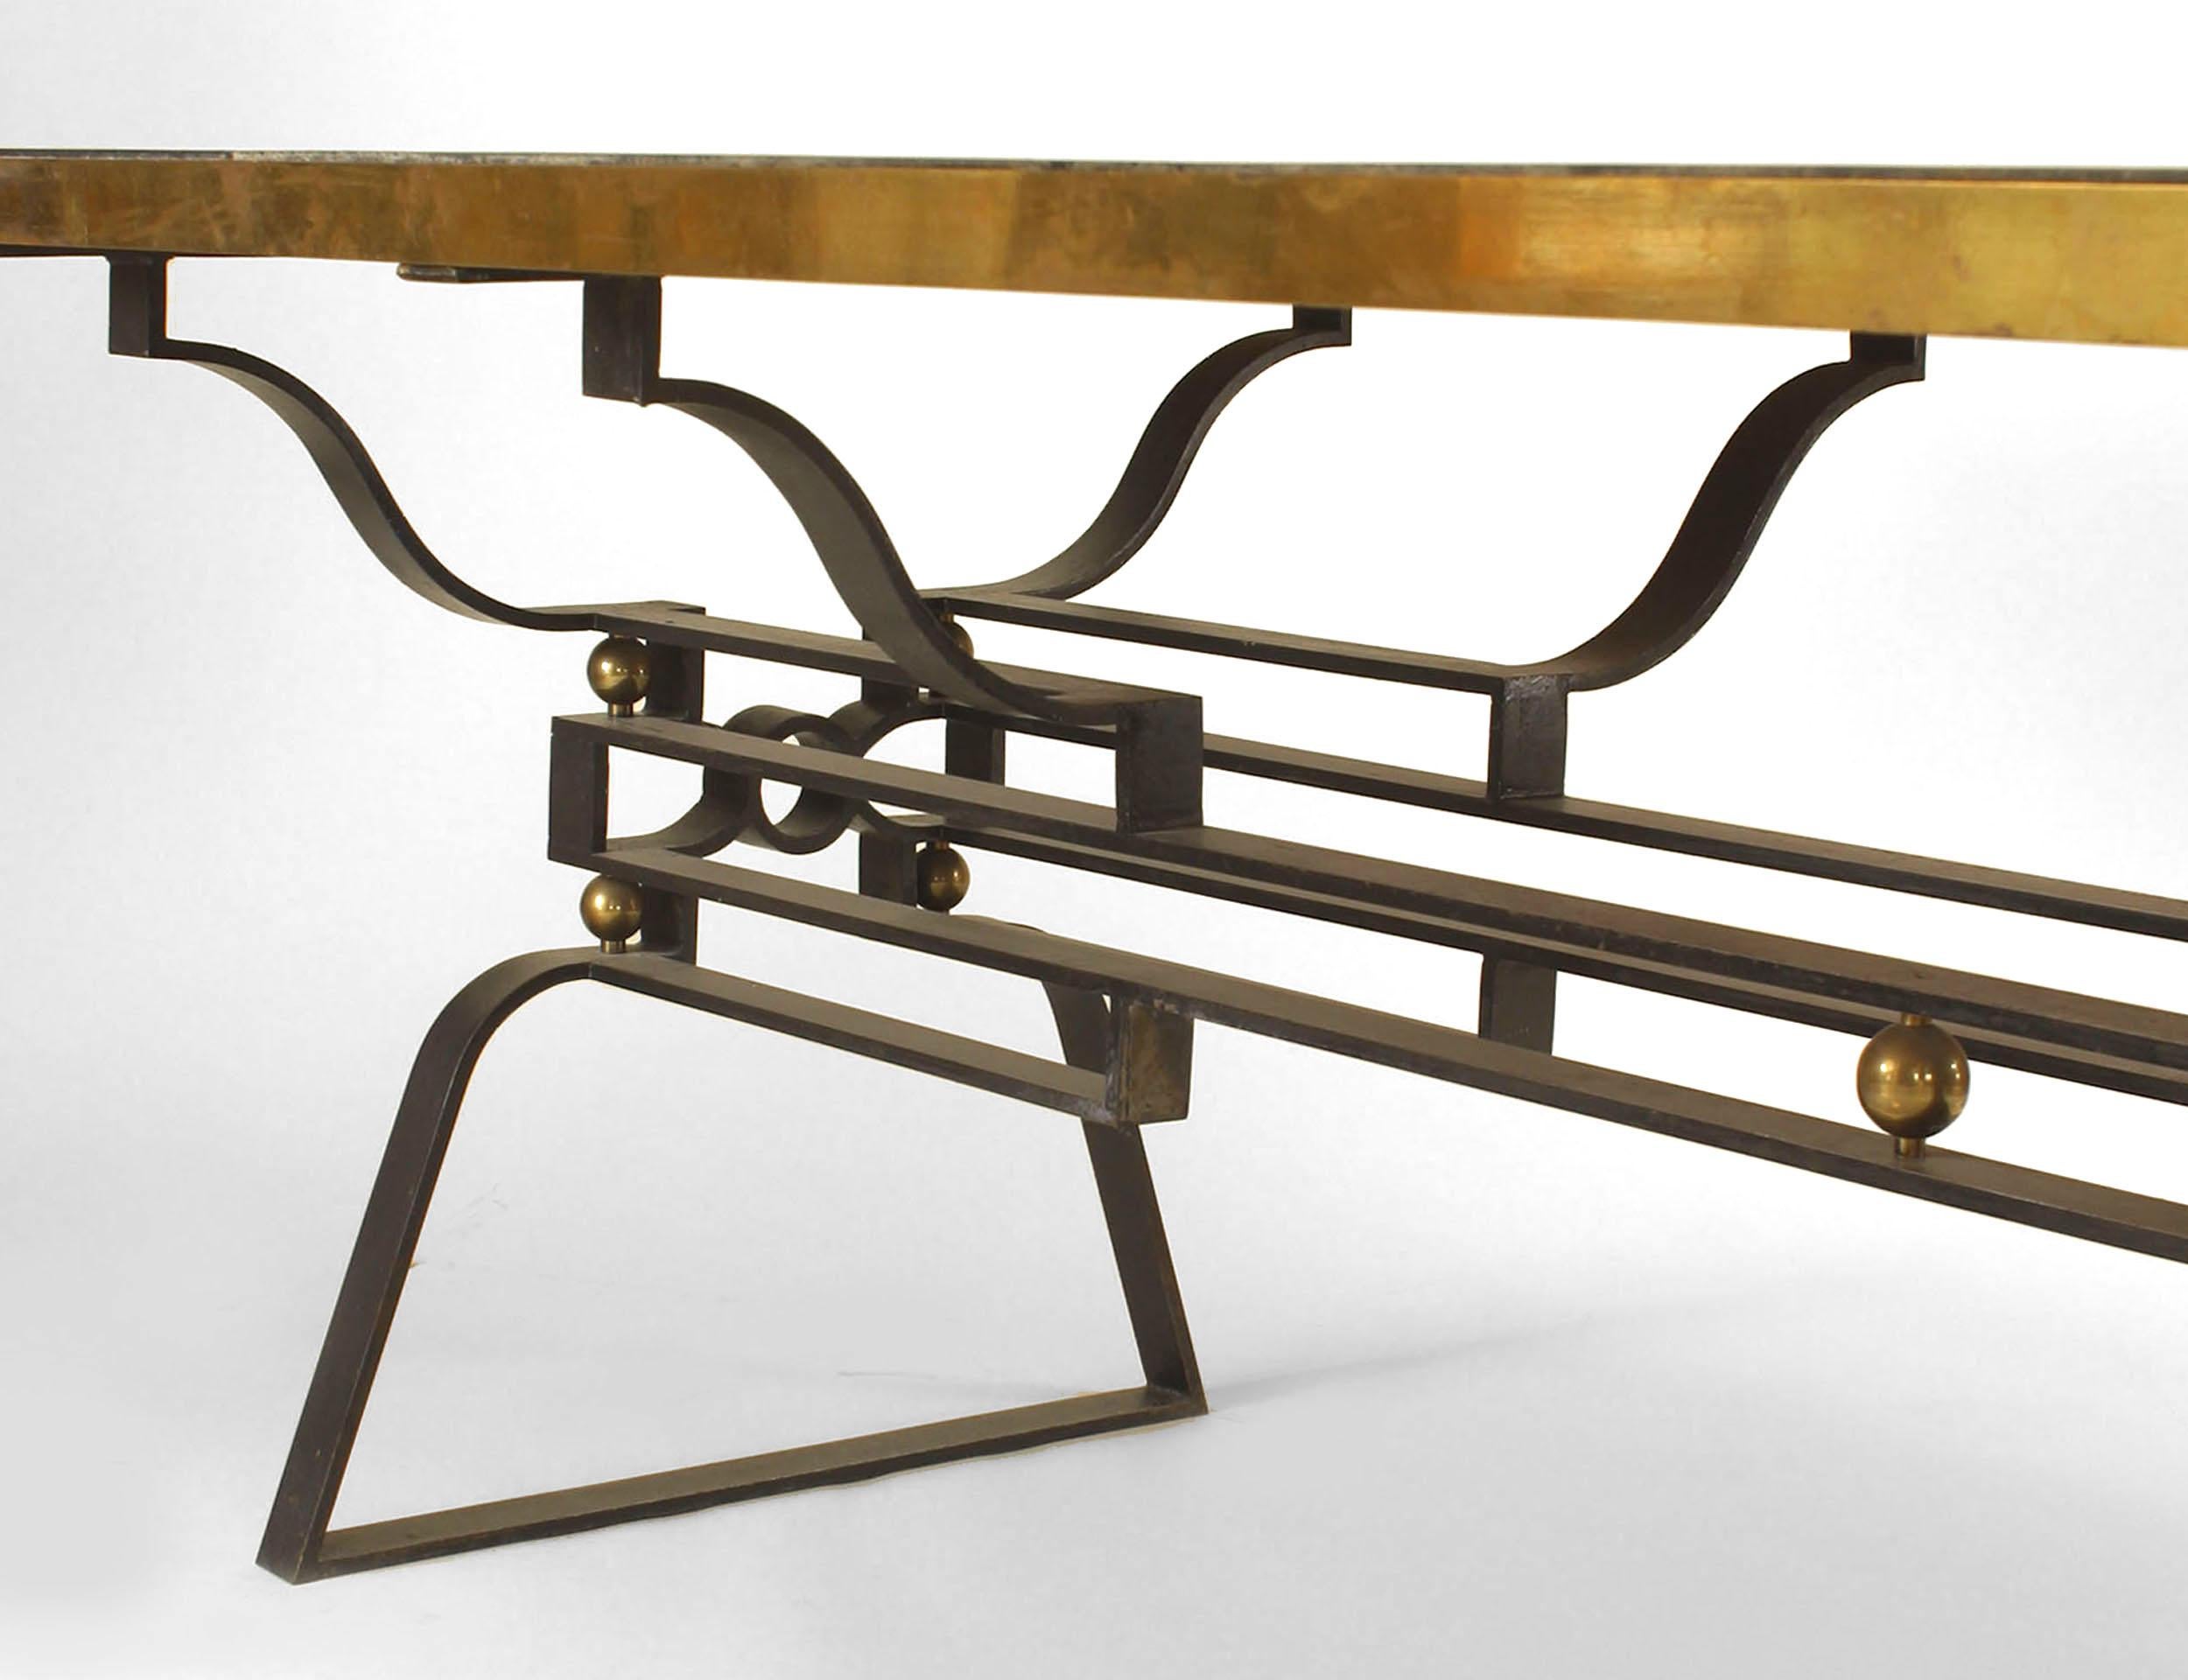 French Post-War Design (1950s) iron dining table with a geometric design stretcher and trimmed with bronze balls and top rim with sectioned inset black marble. (Attributed to GILBERT POILLERAT)
